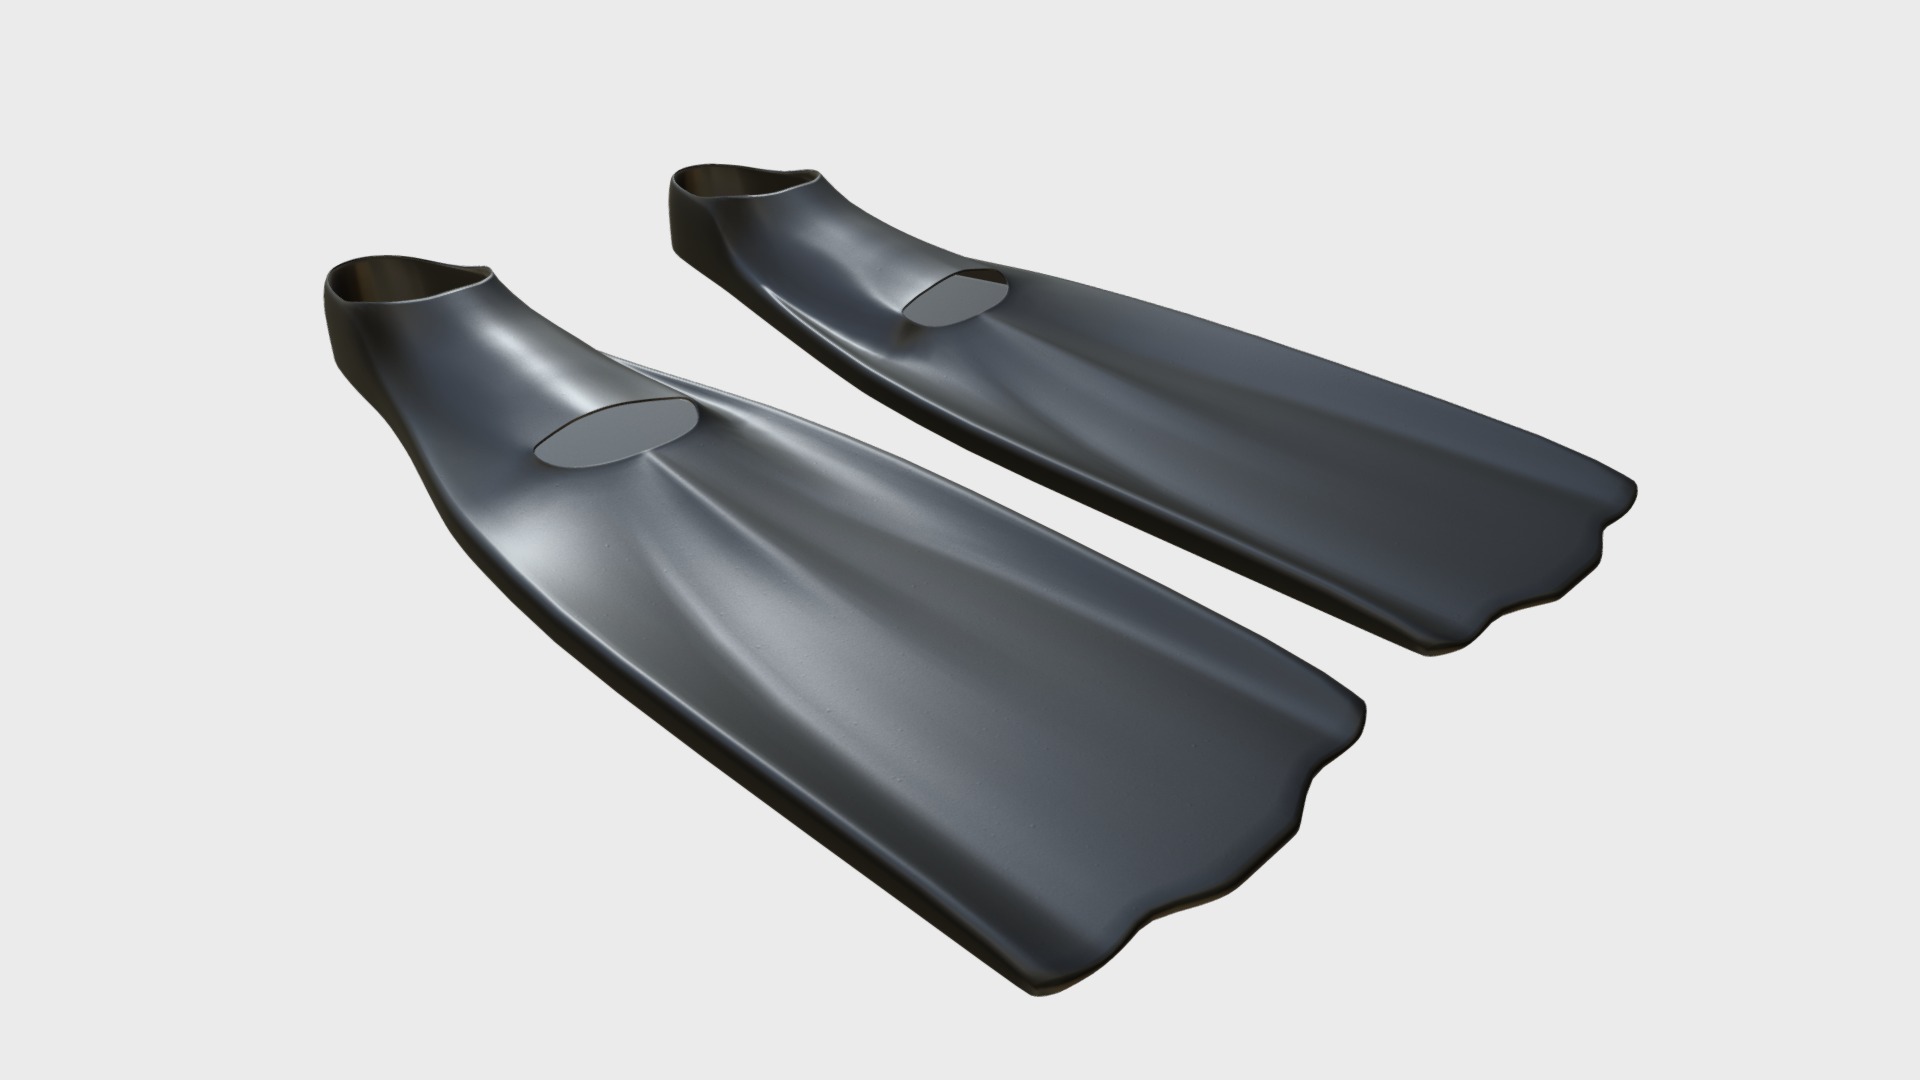 3D model Swimming fins 1 - This is a 3D model of the Swimming fins 1. The 3D model is about a black stapler with a handle.